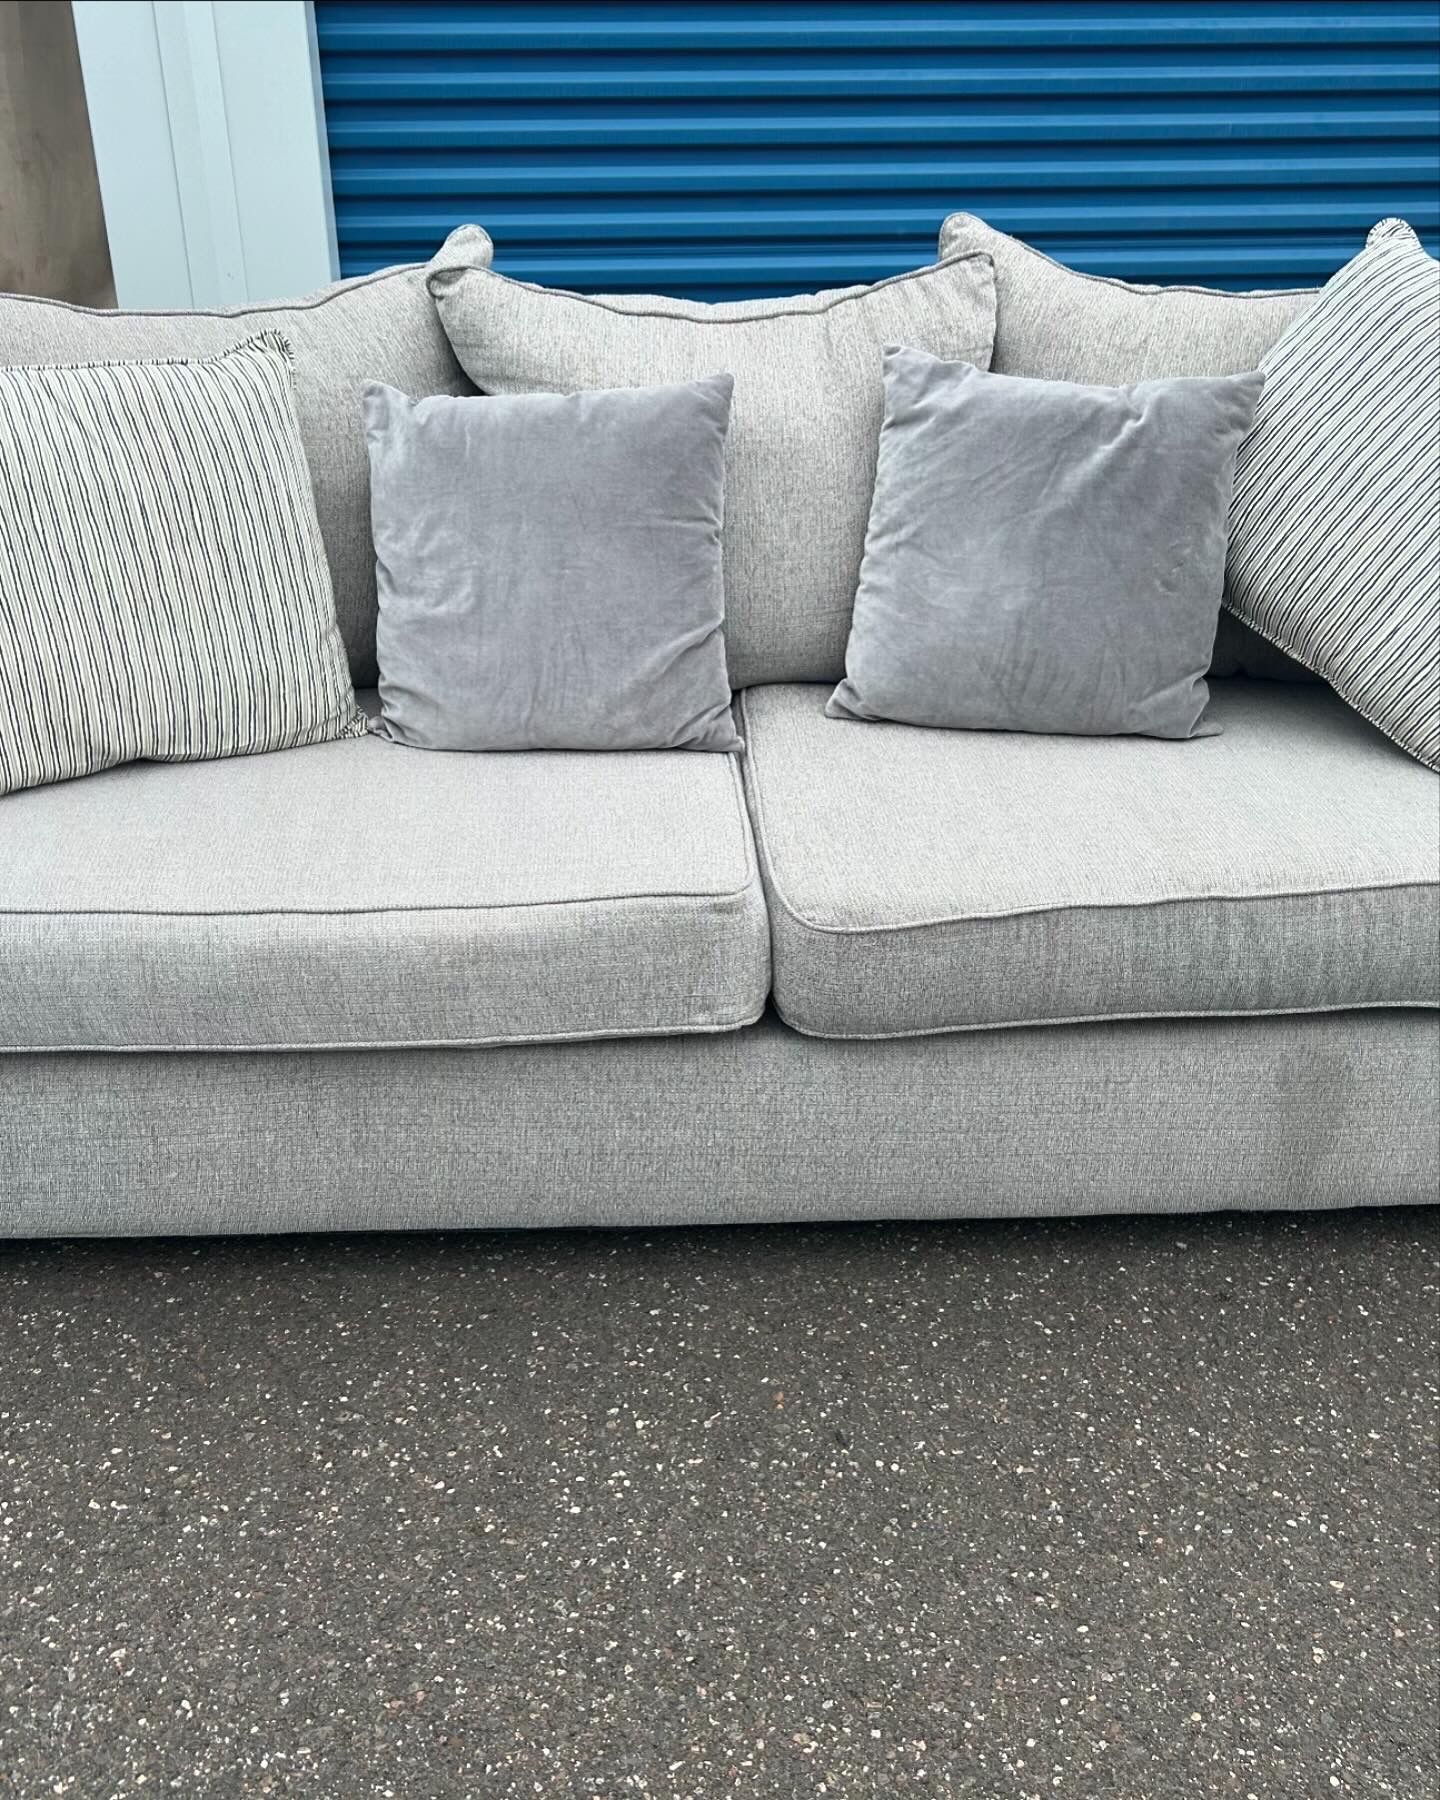 Gray  Couch No Stains Or Rips No Pets Or Kids 